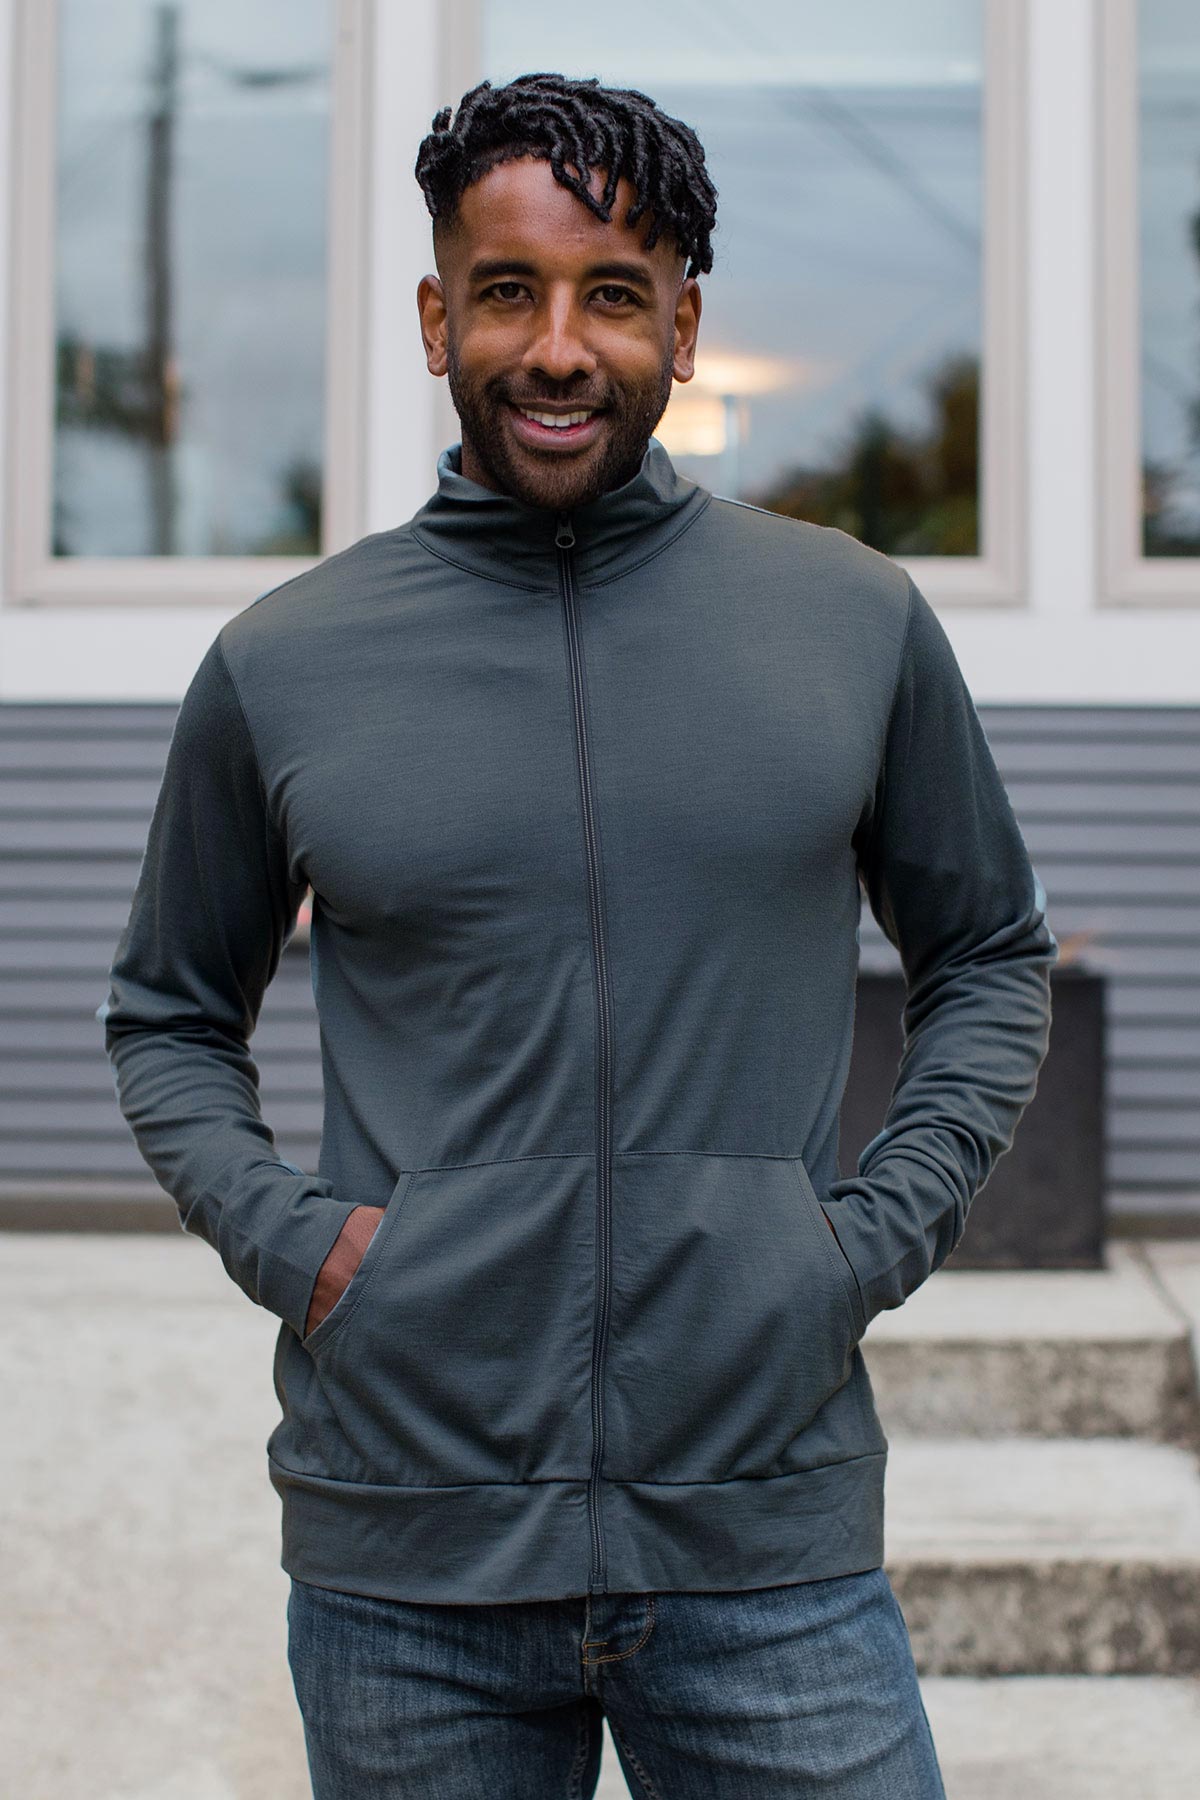 A man standing and smiling with both hands in his jacket pockets, wearing Yala Superfine Merino Wool Track Jacket in Storm Grey